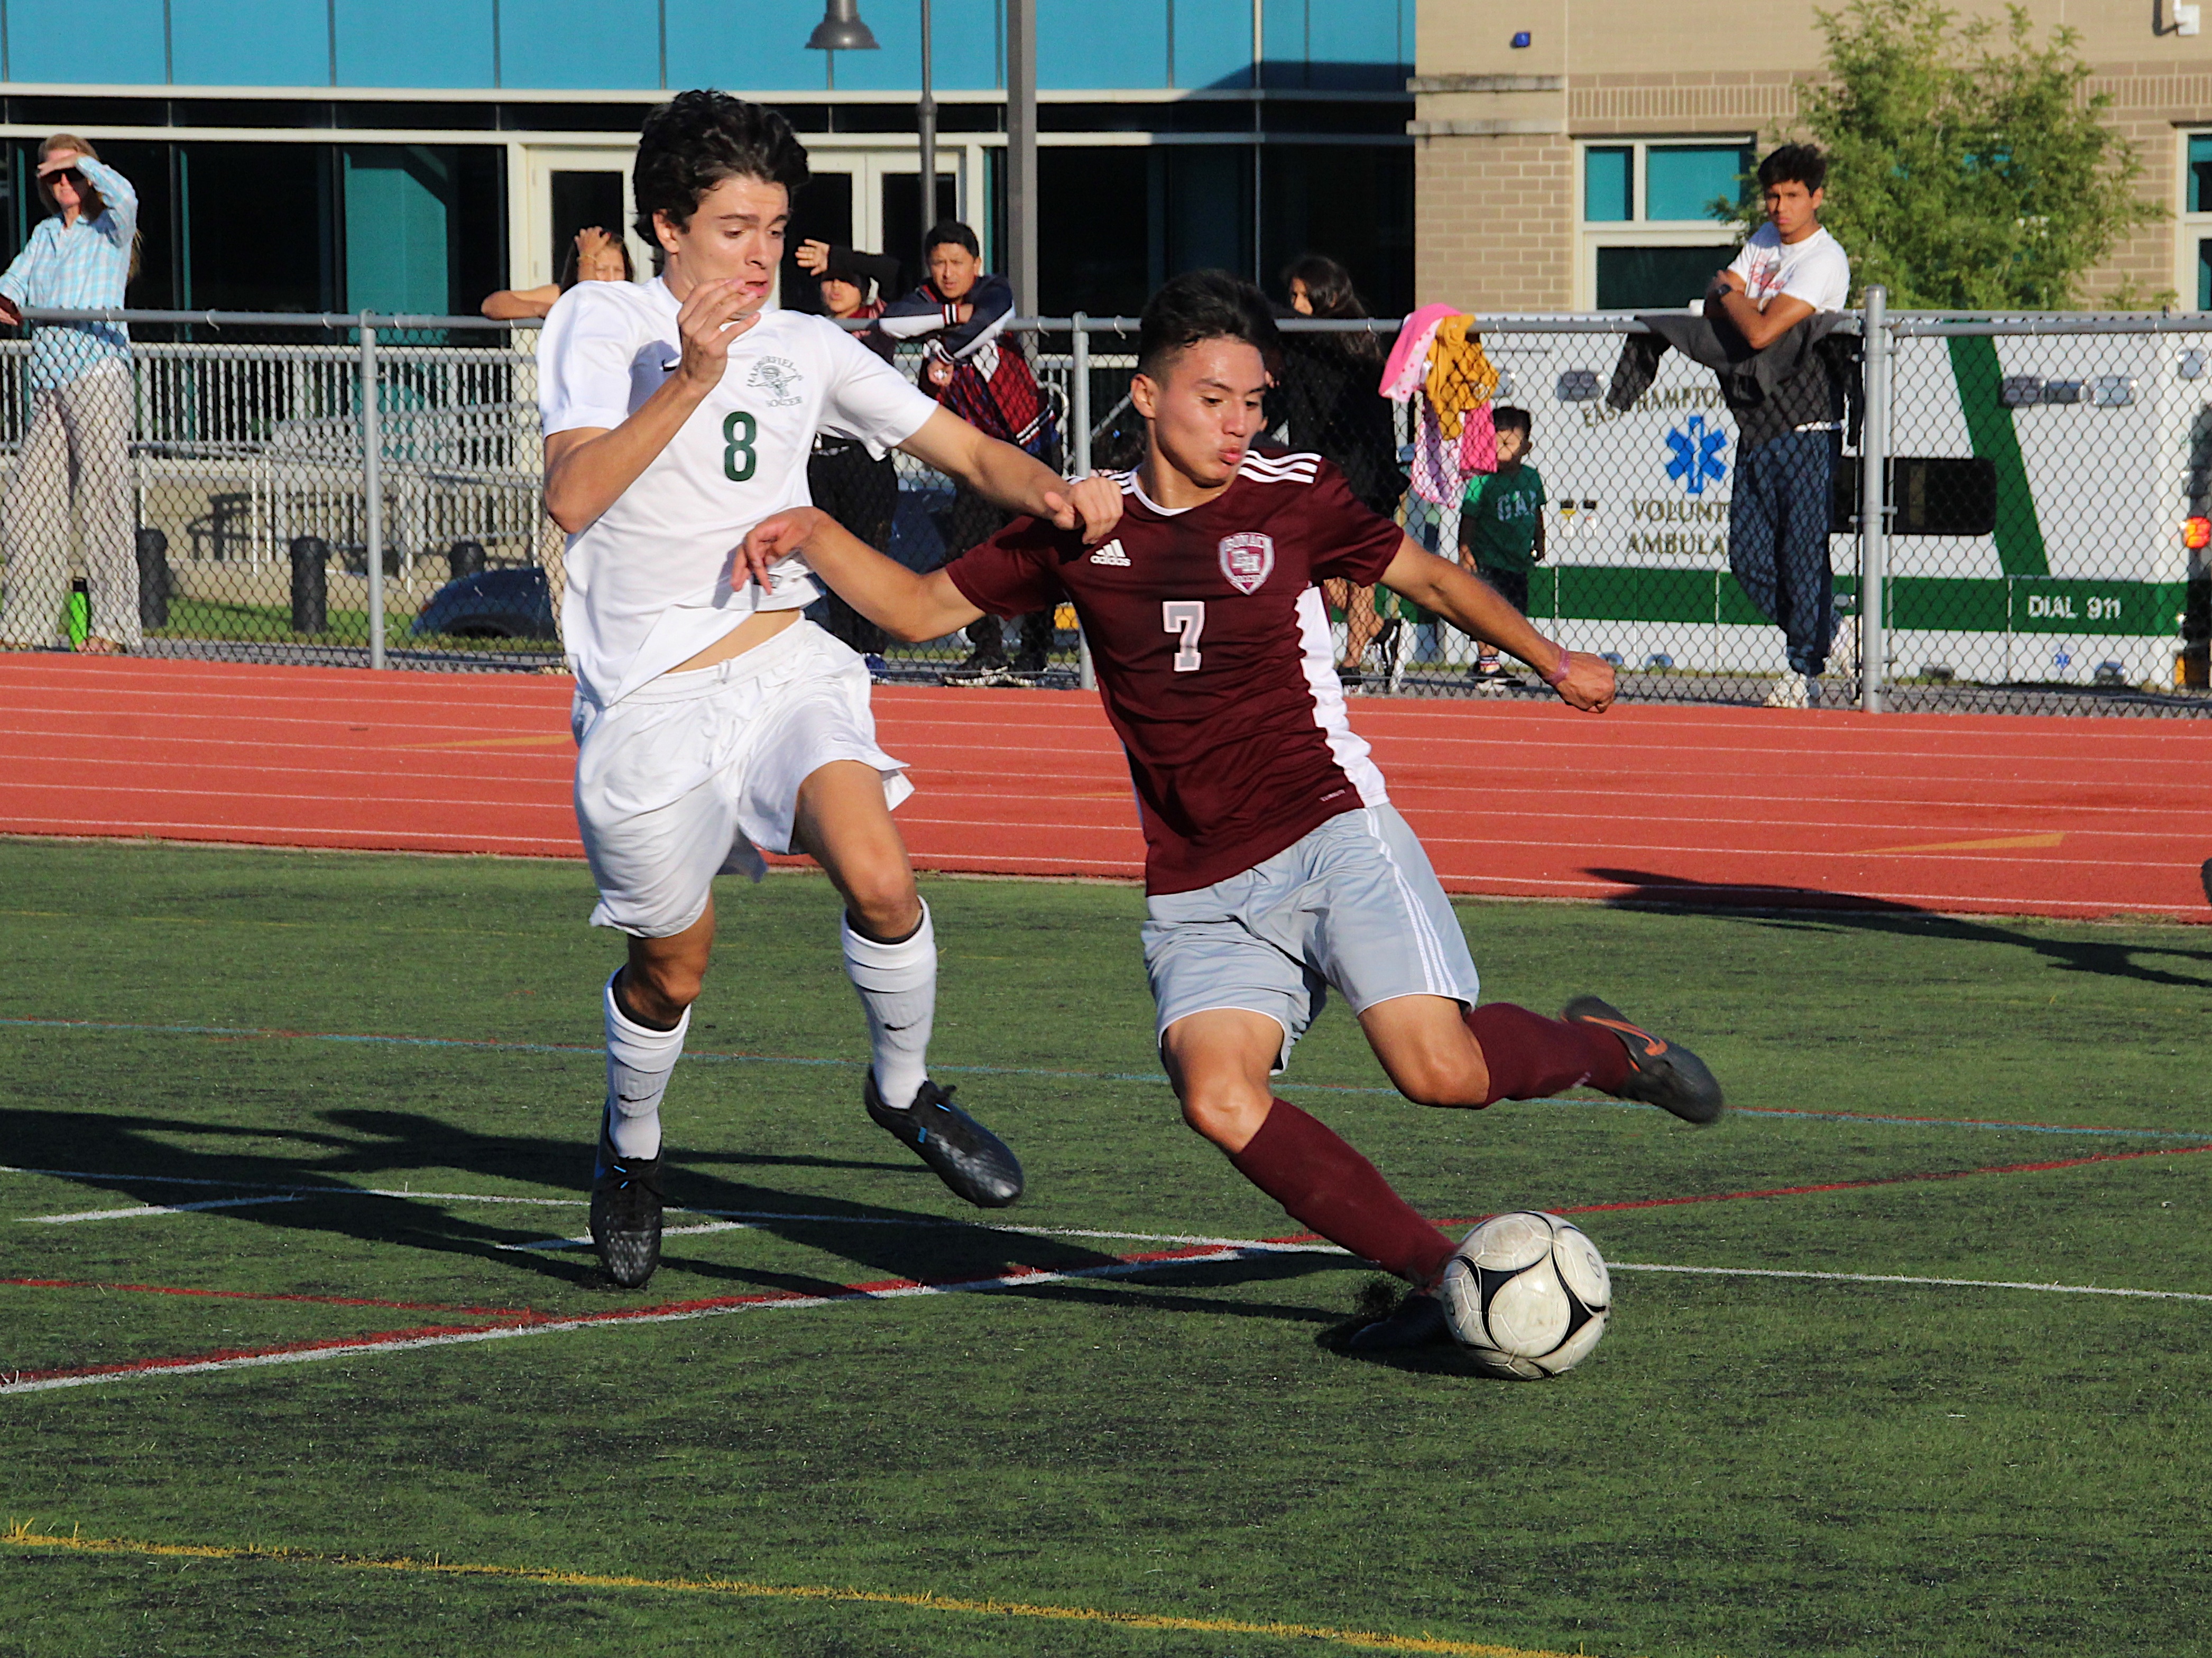 East Hampton junior Christopher Pintado plays the ball in the corner against Harborfields at home on September 24.